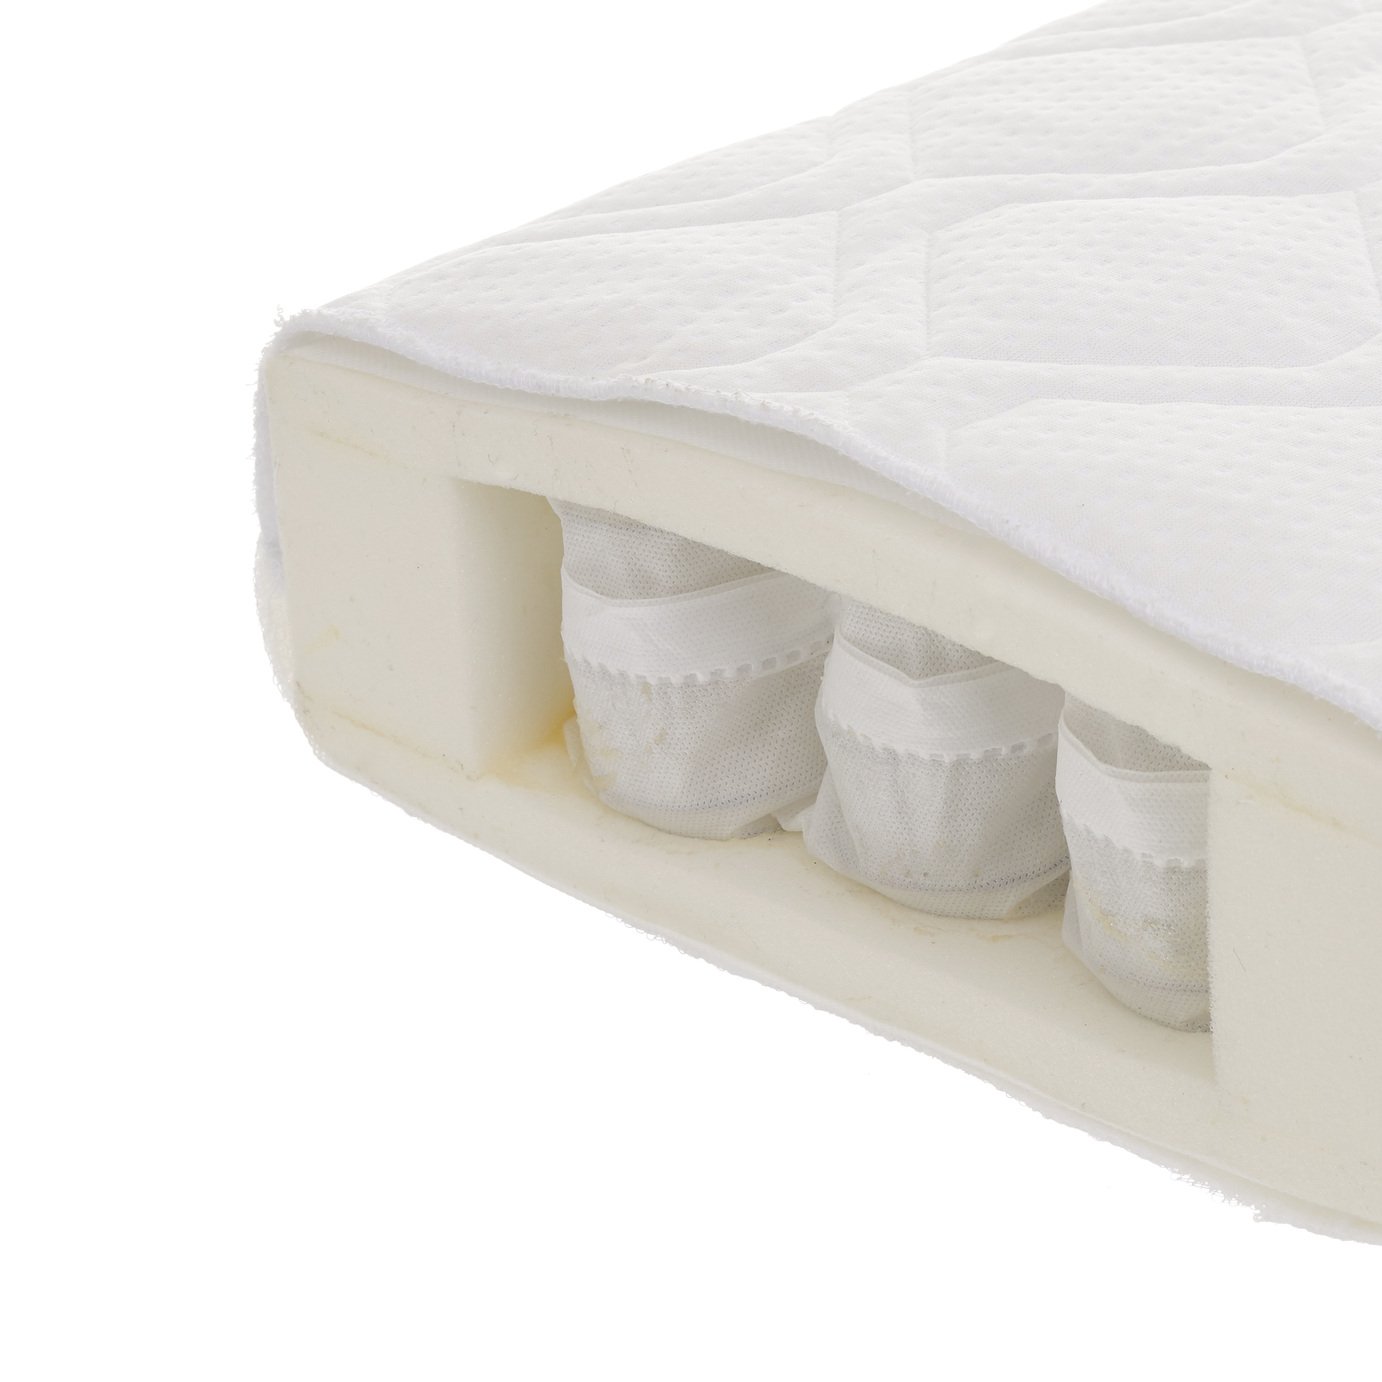 Obaby 140 x 70cm All Seasons Pocket Sprung Cot Bed Mattress Review